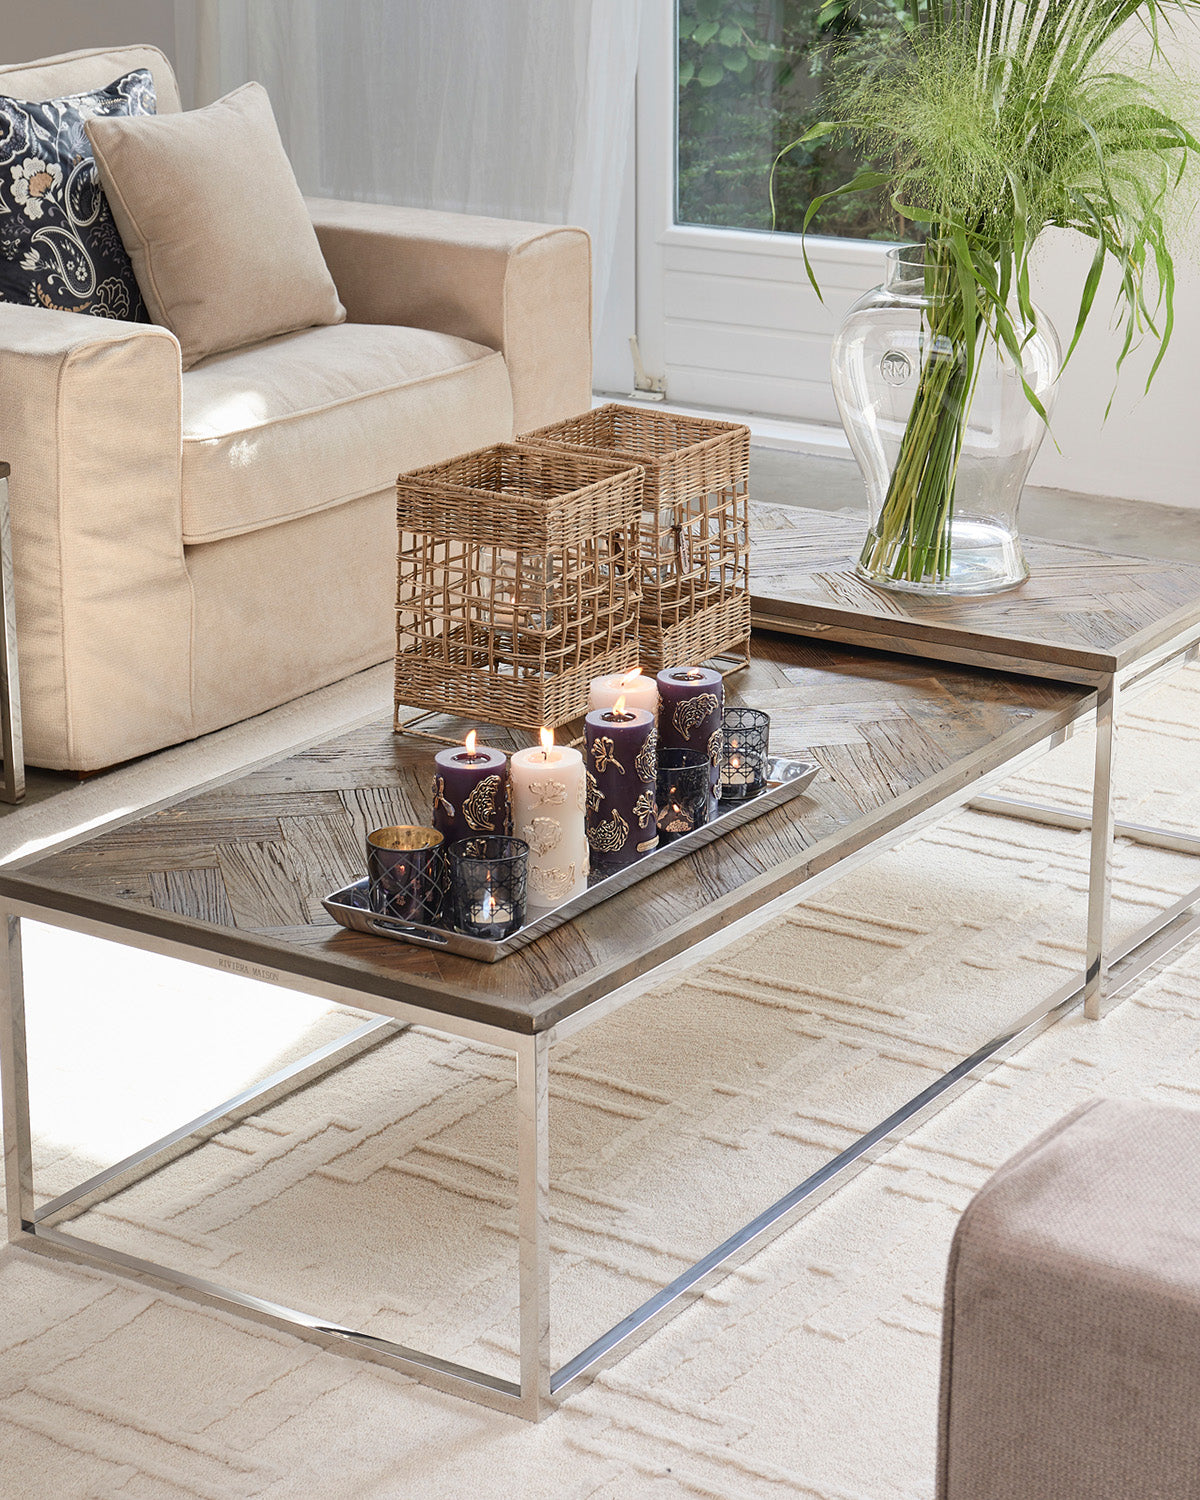 HURRICANE lamp made of woven rustic Rattan, decorated on a table by Riviera Maison